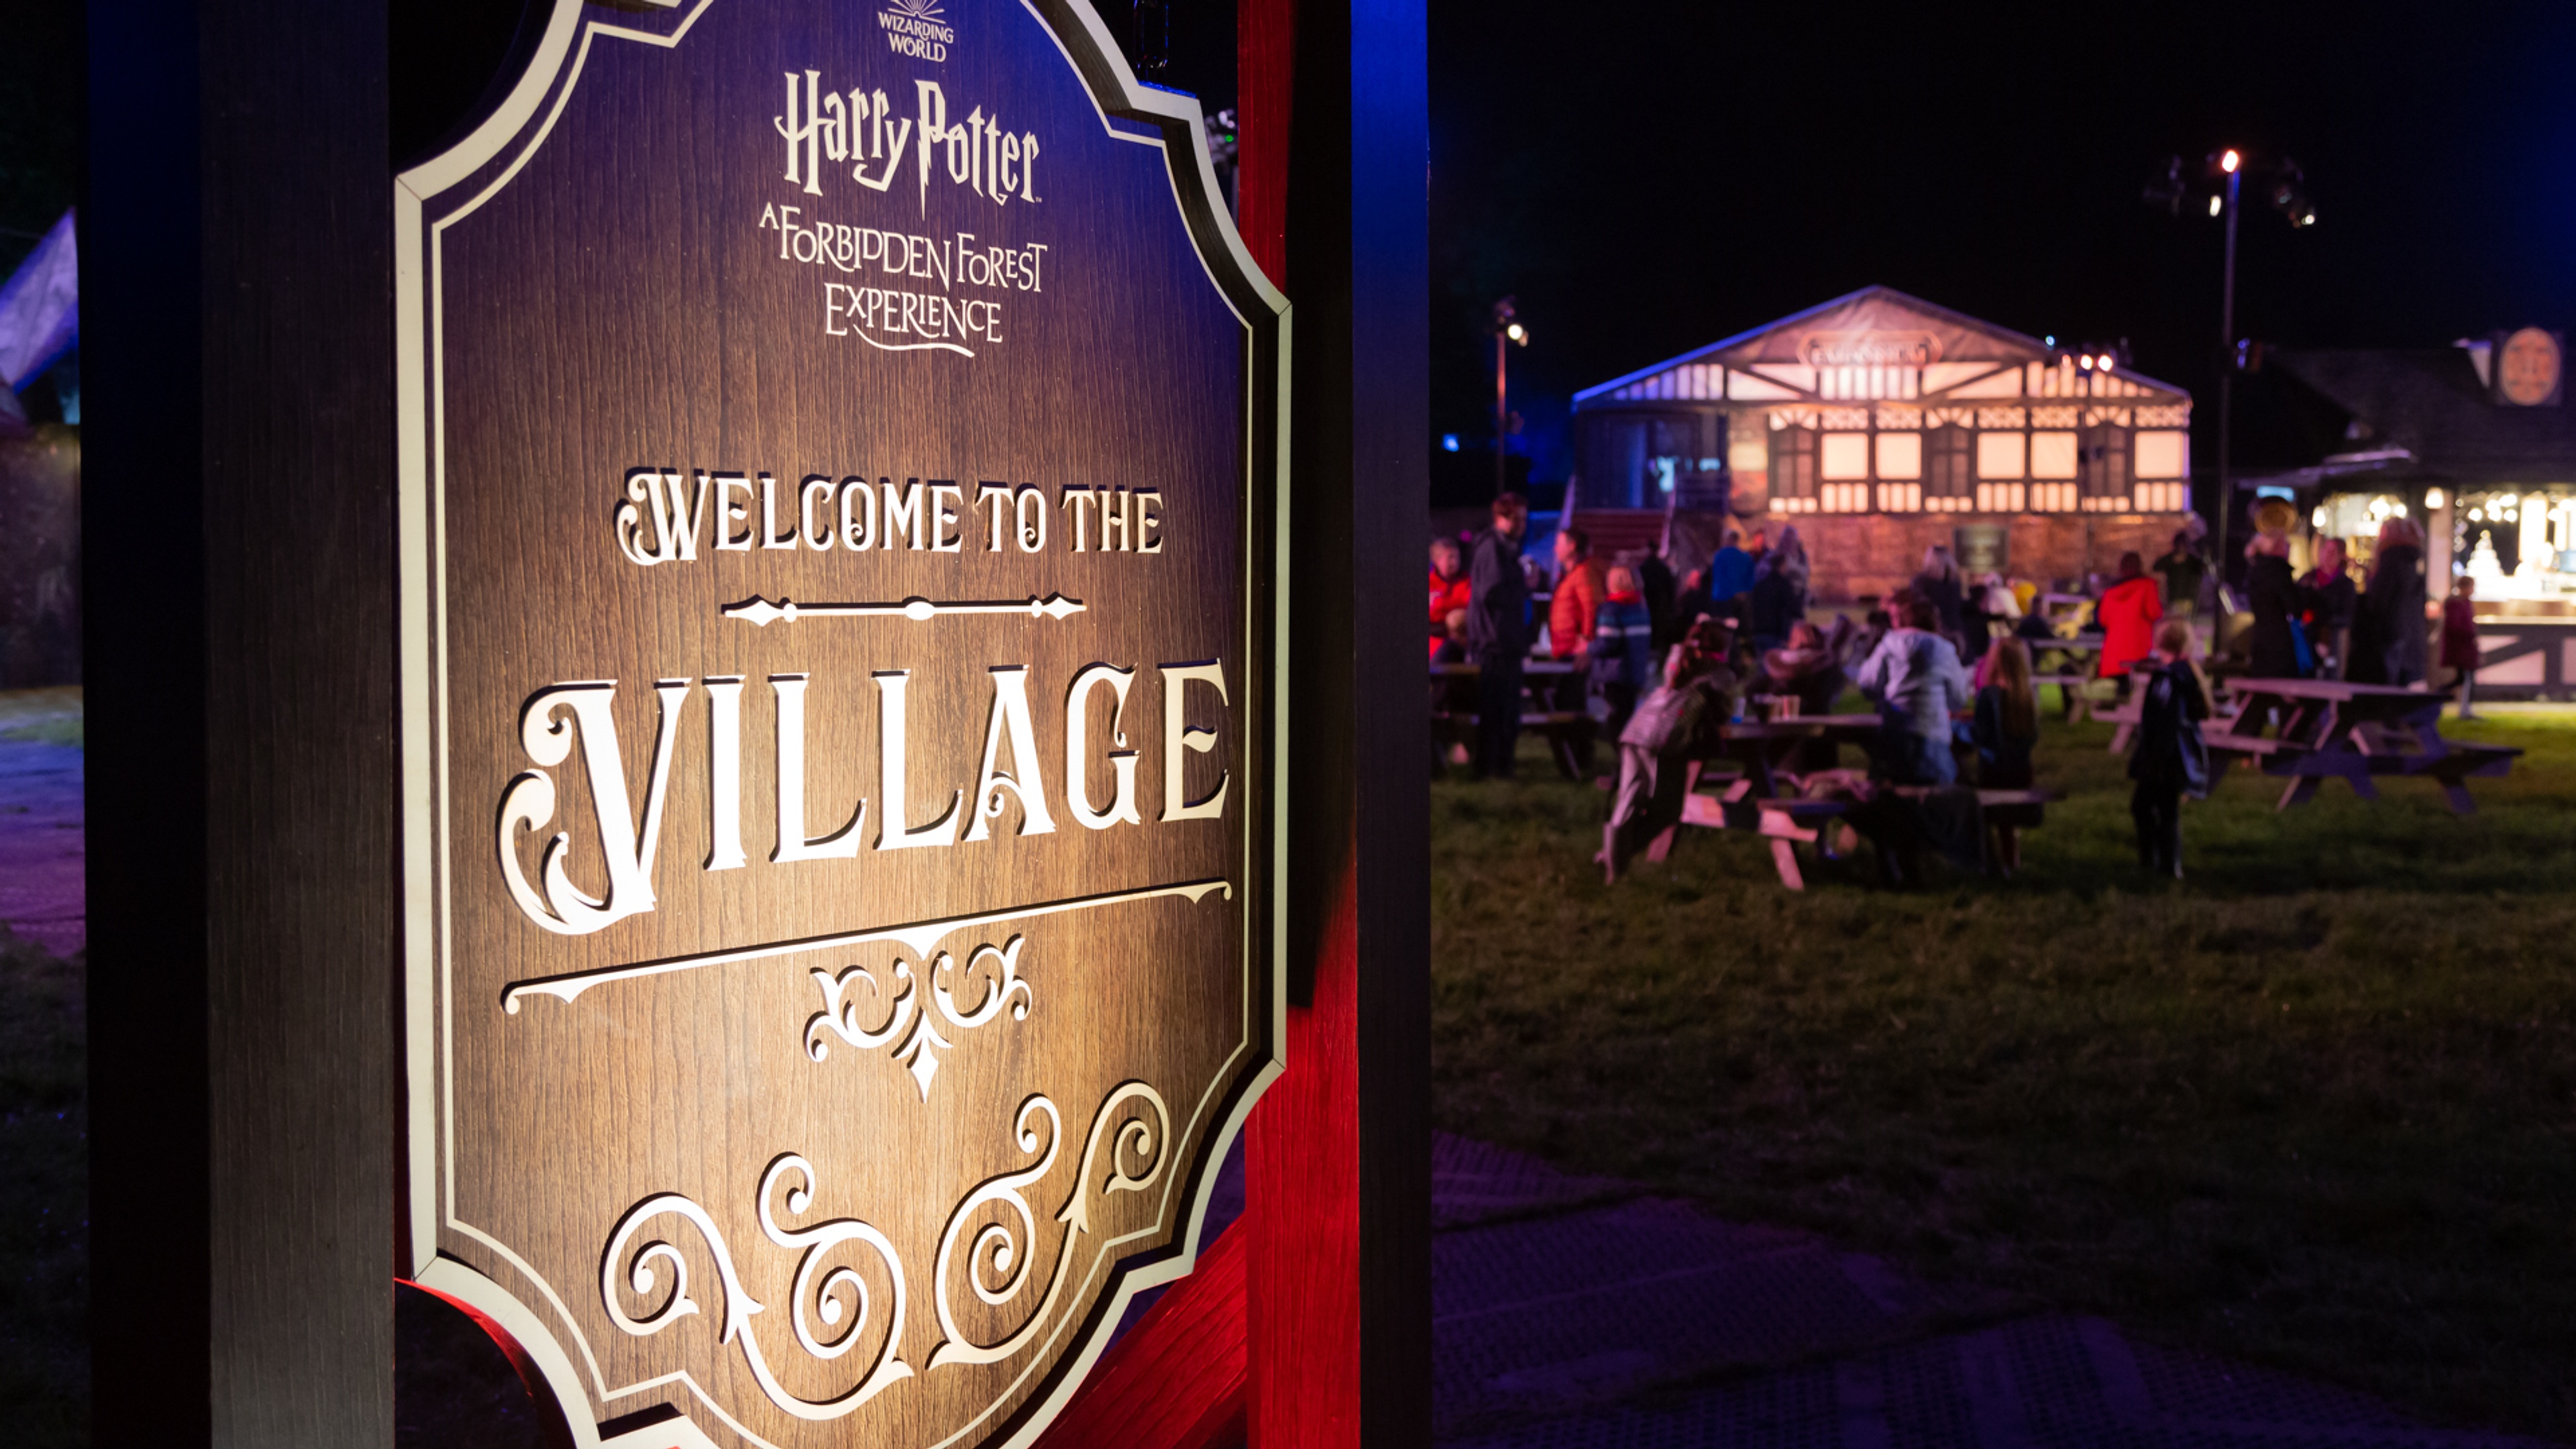 Harry Potter: A Forbidden Forest Experience wayfinding signage that says Welcome To The Village